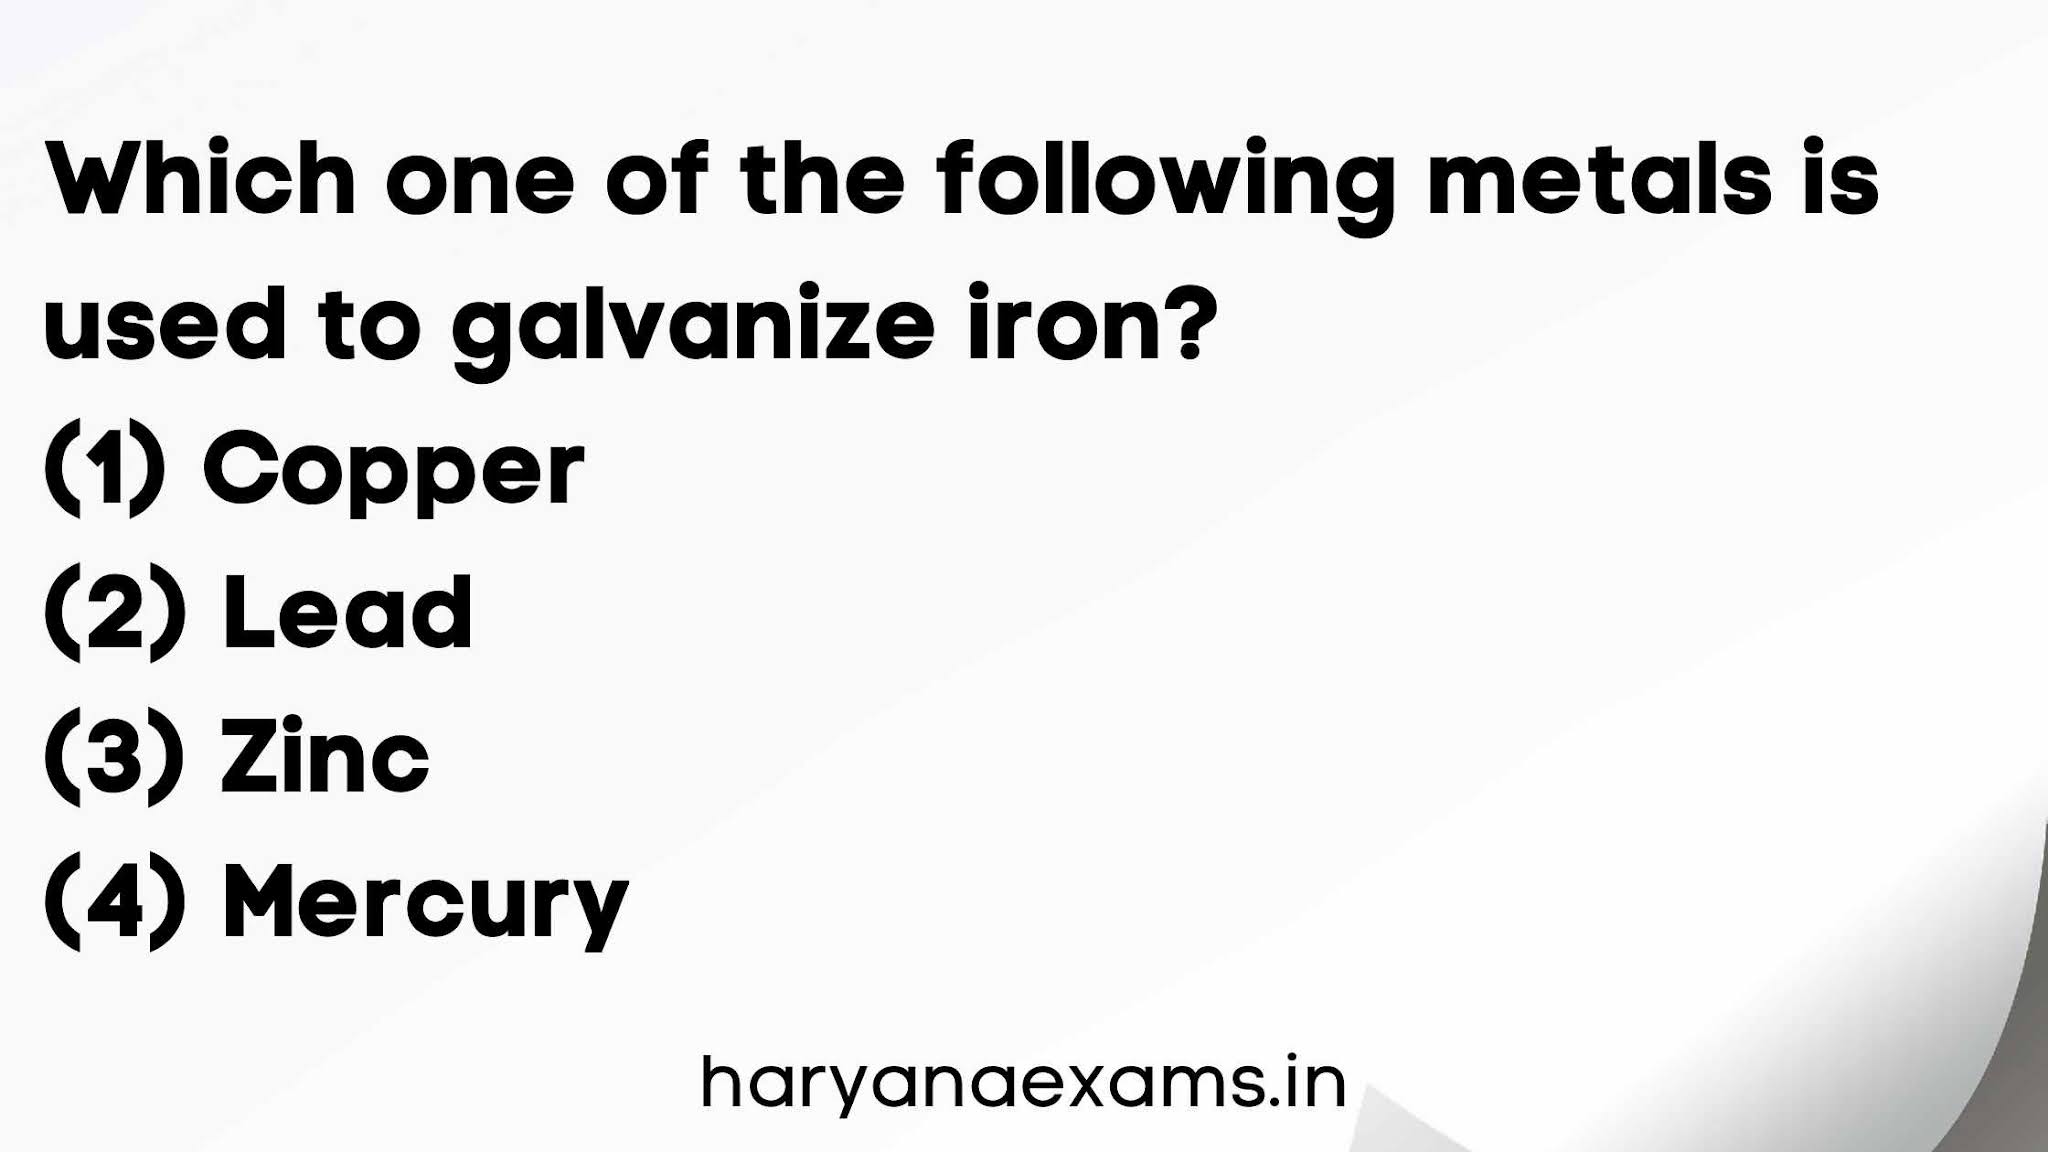 Which one of the following metals is used to galvanize iron?   (1) Copper   (2) Lead   (3) Zinc   (4) Mercury